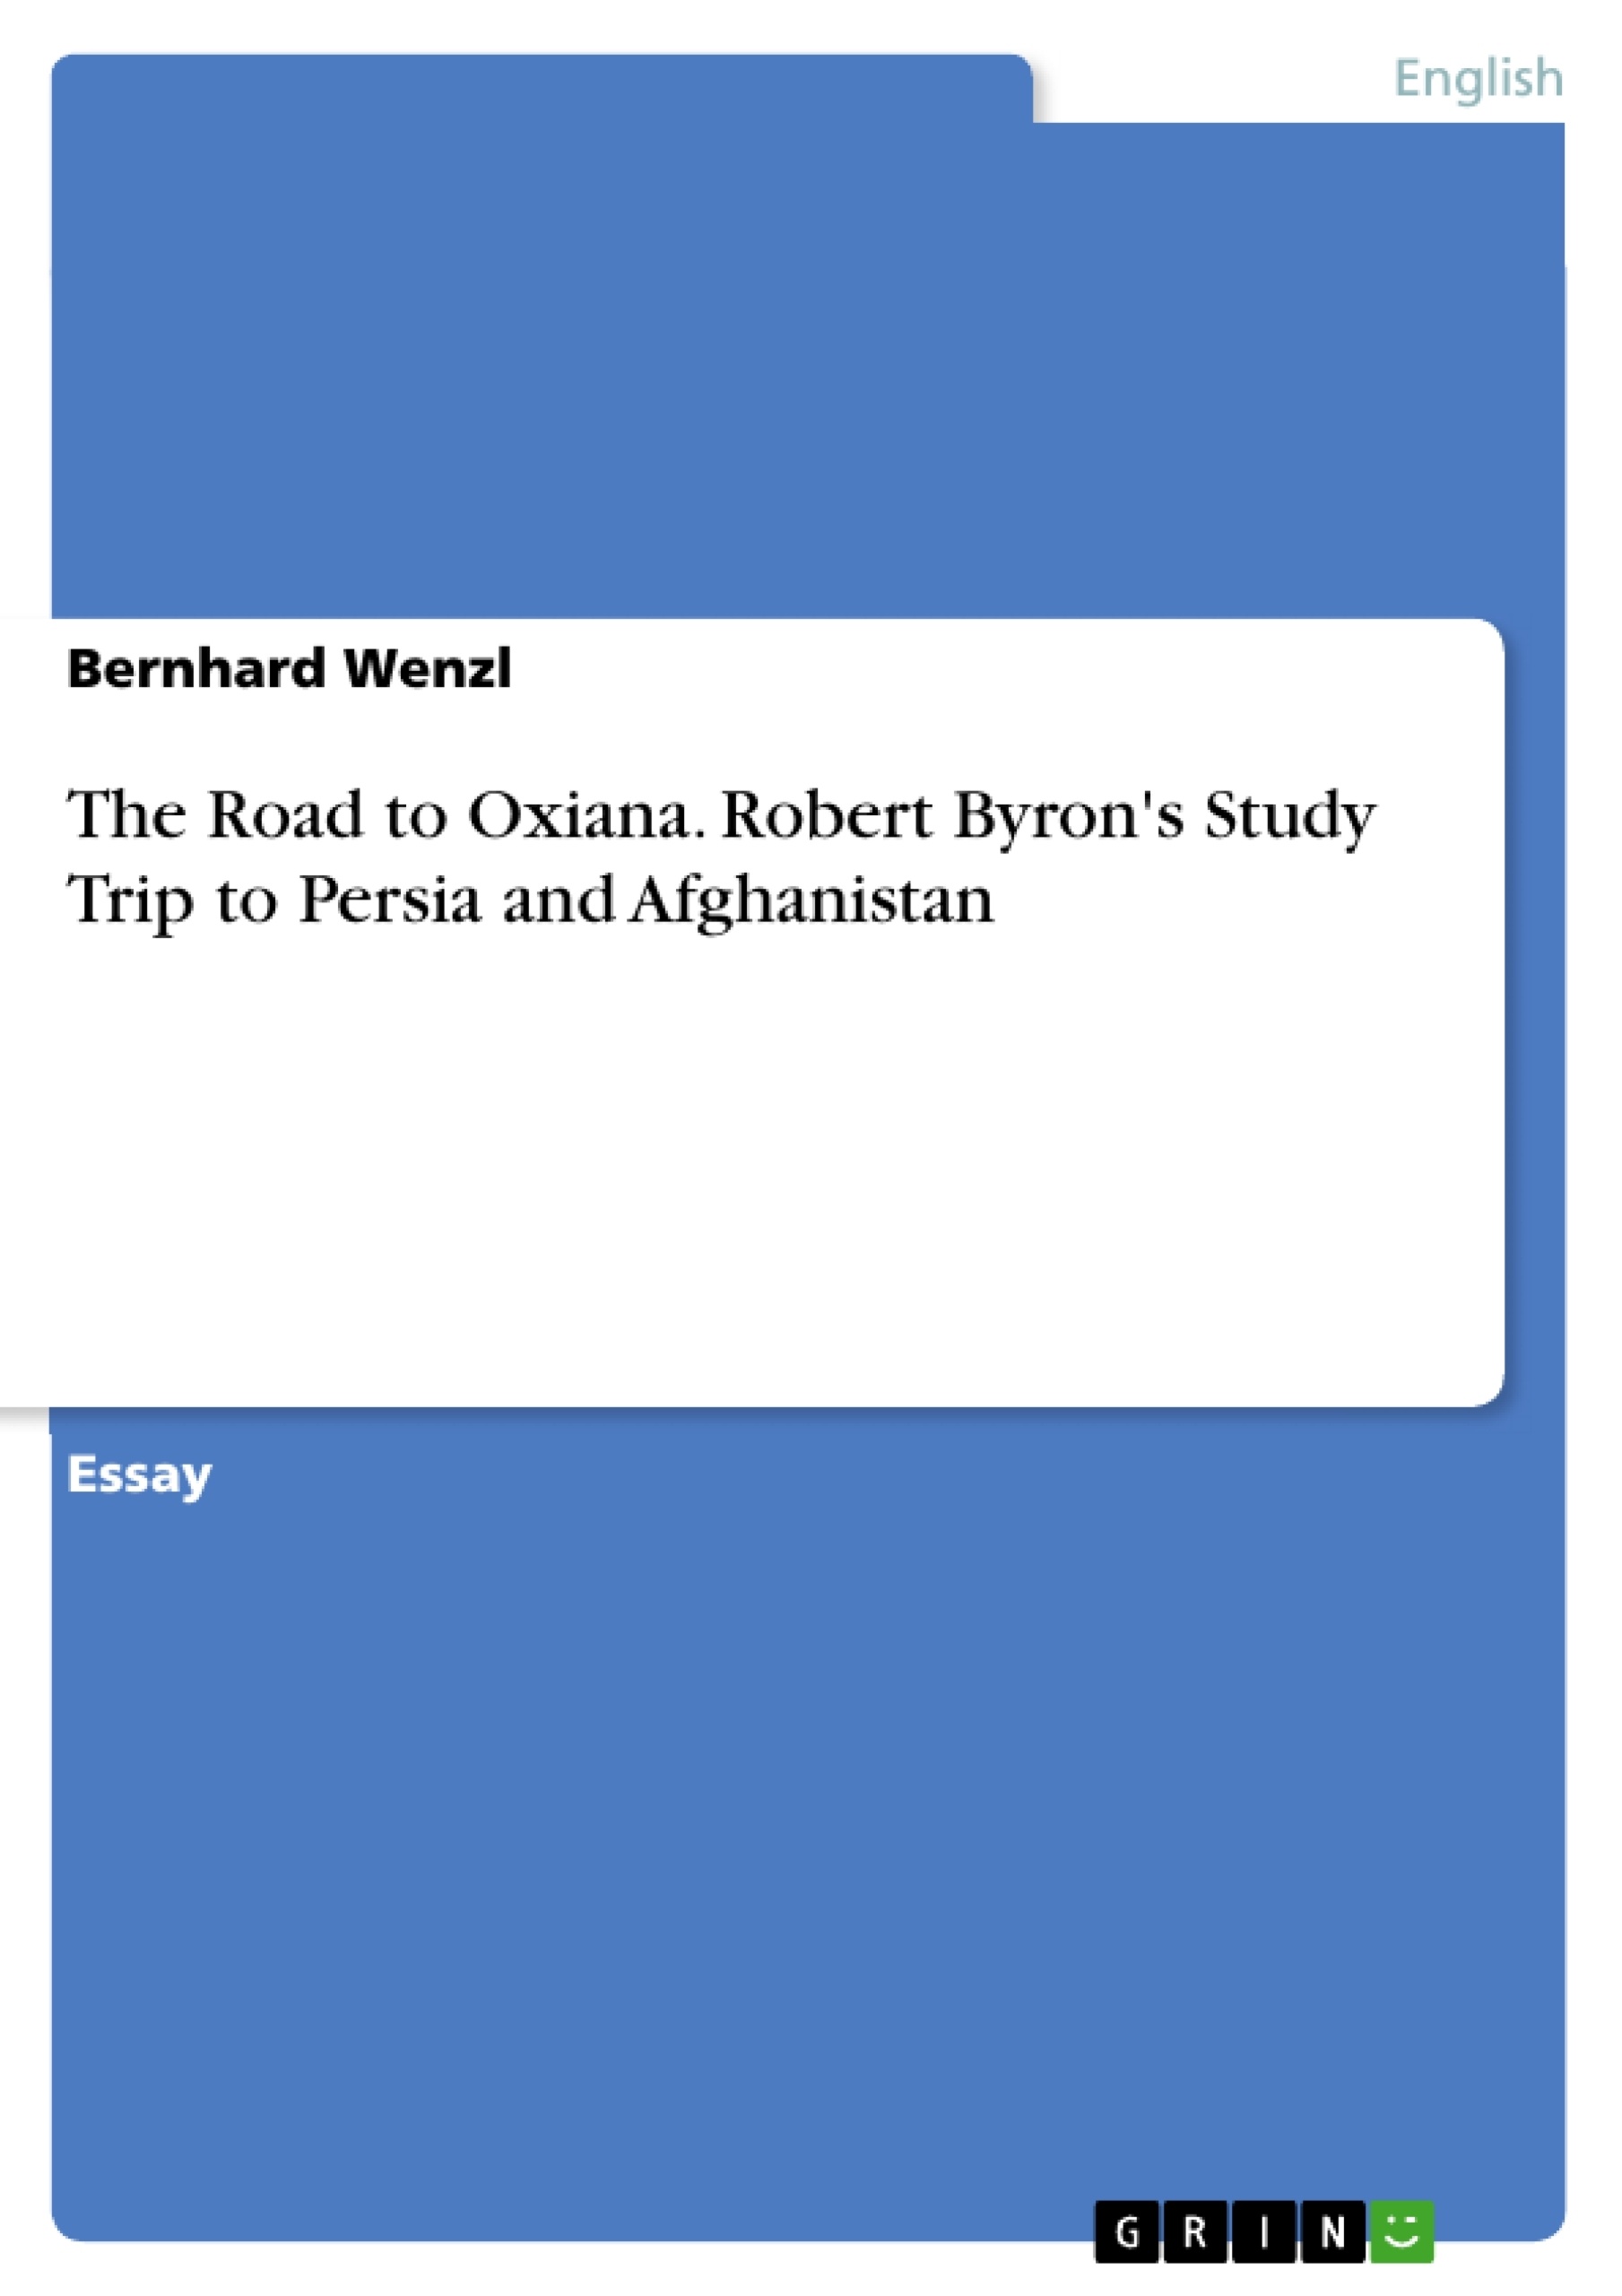 Title: The Road to Oxiana. Robert Byron's Study Trip to Persia and Afghanistan